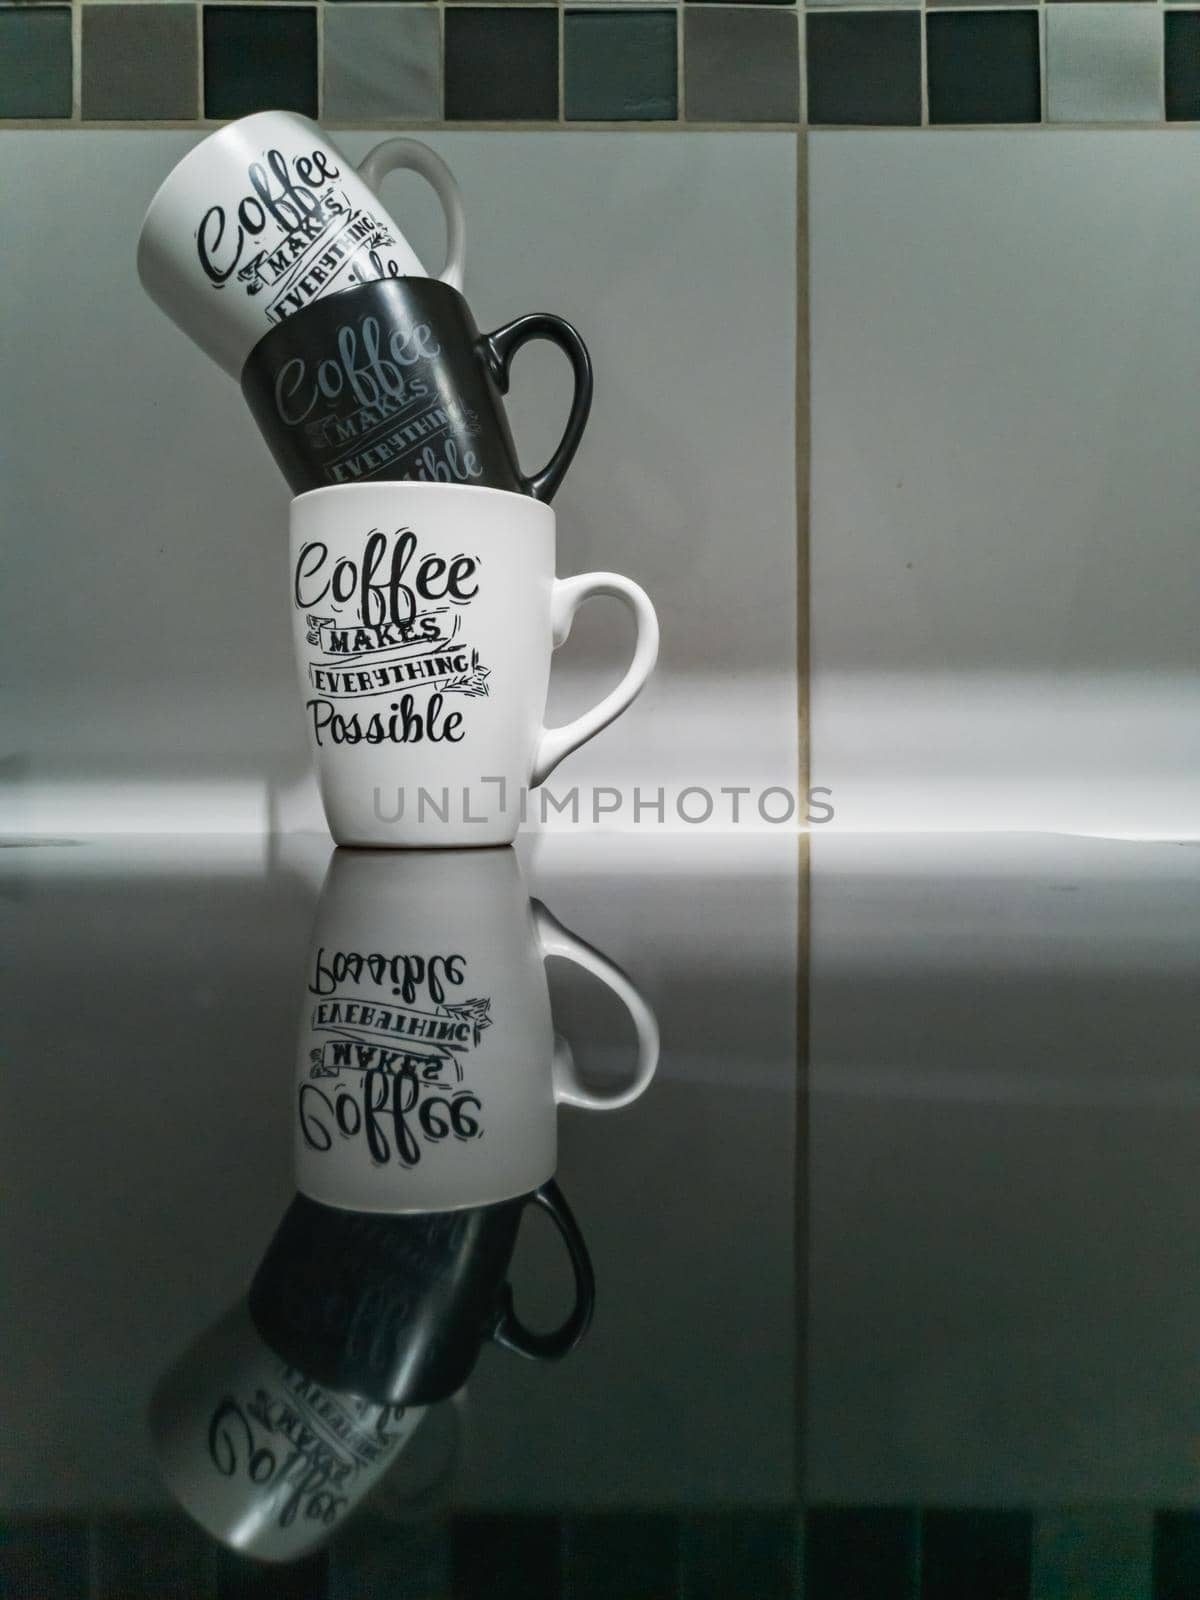 Stack of black and white mugs with calligraphy writings on it standing on reflective black surface